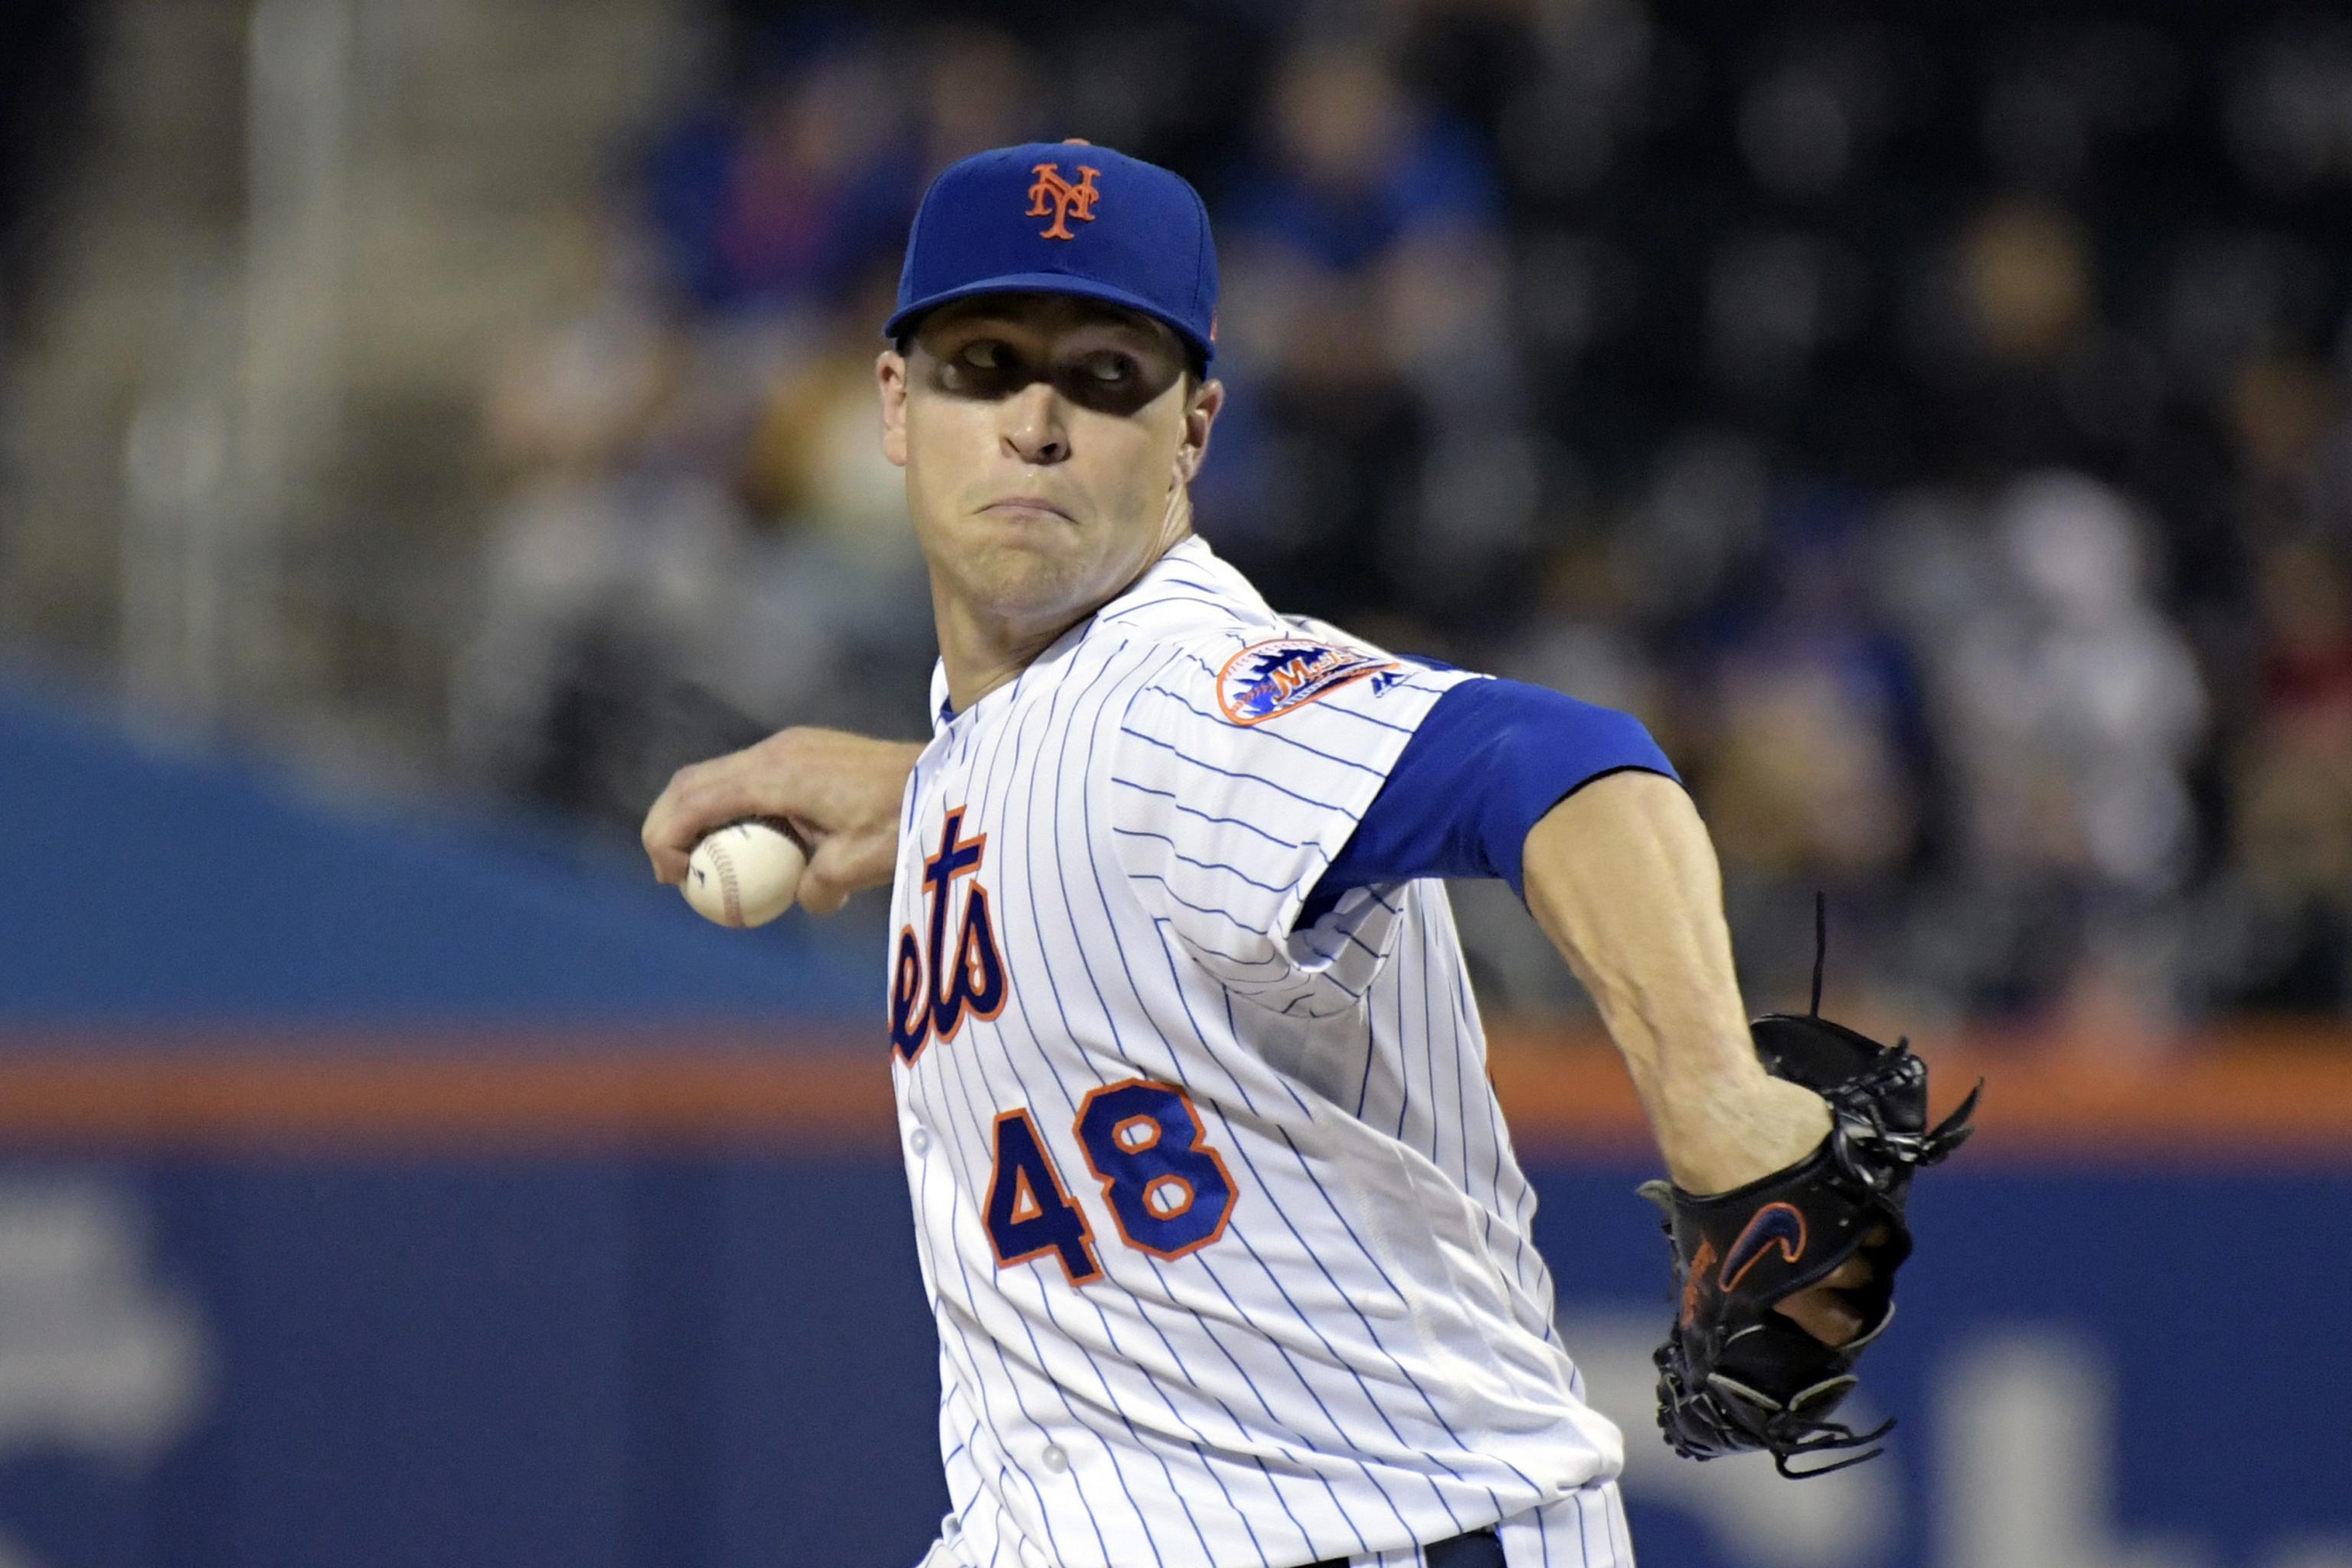 Jacob deGrom won the Cy Young with one of the greatest, silliest